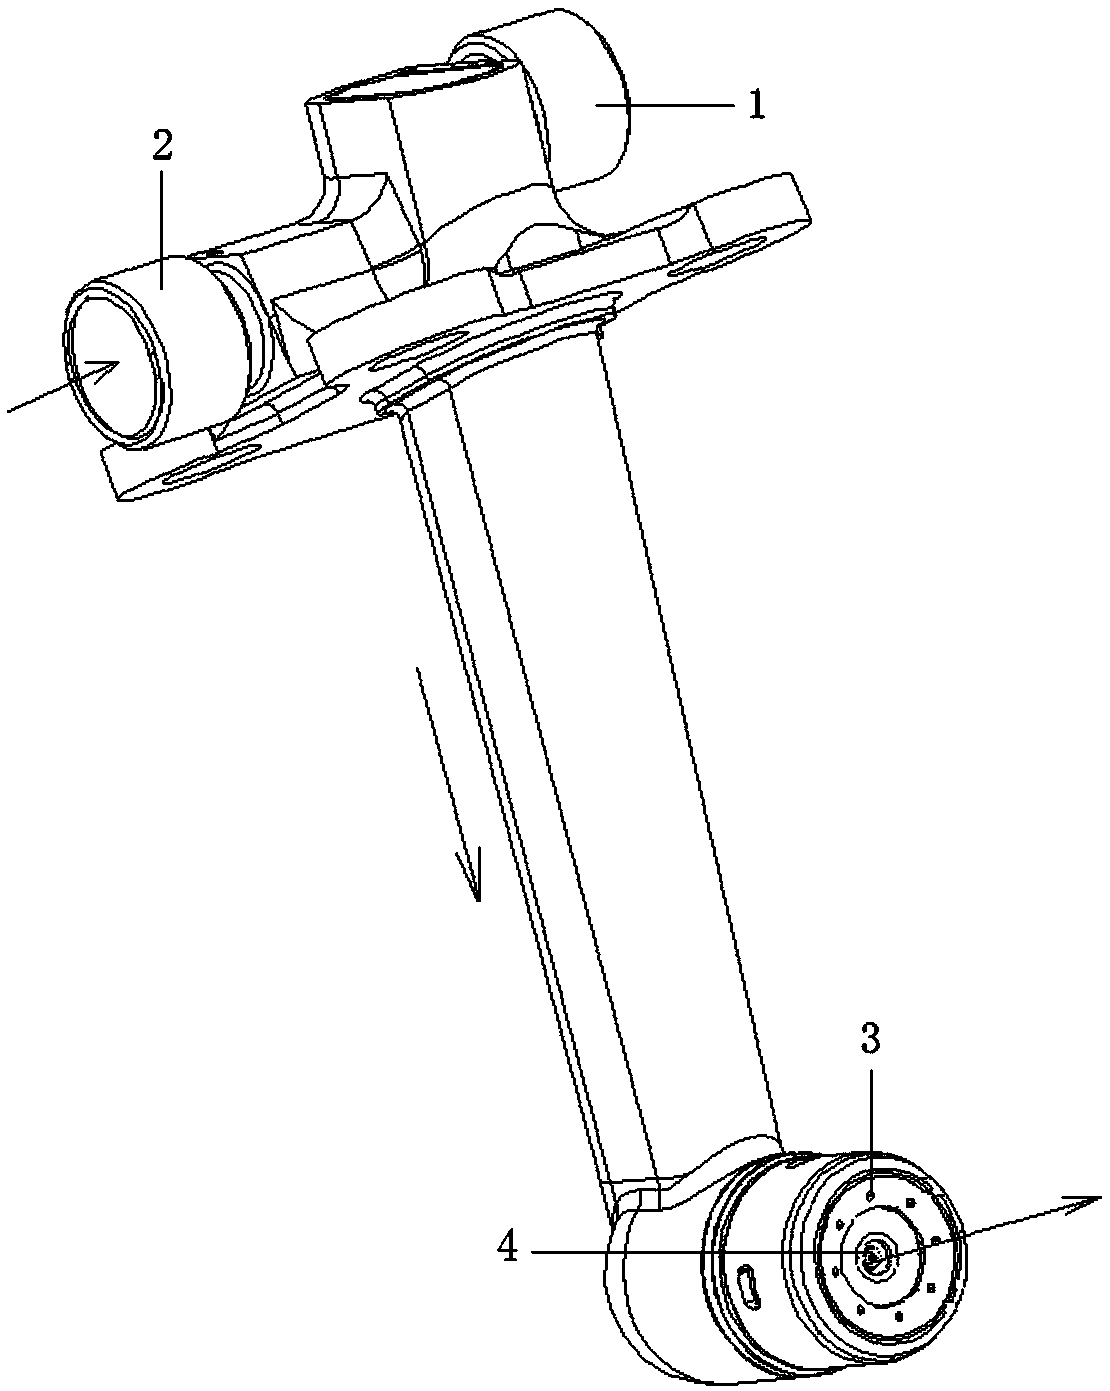 Automatic nozzle deburring and flow adjusting method